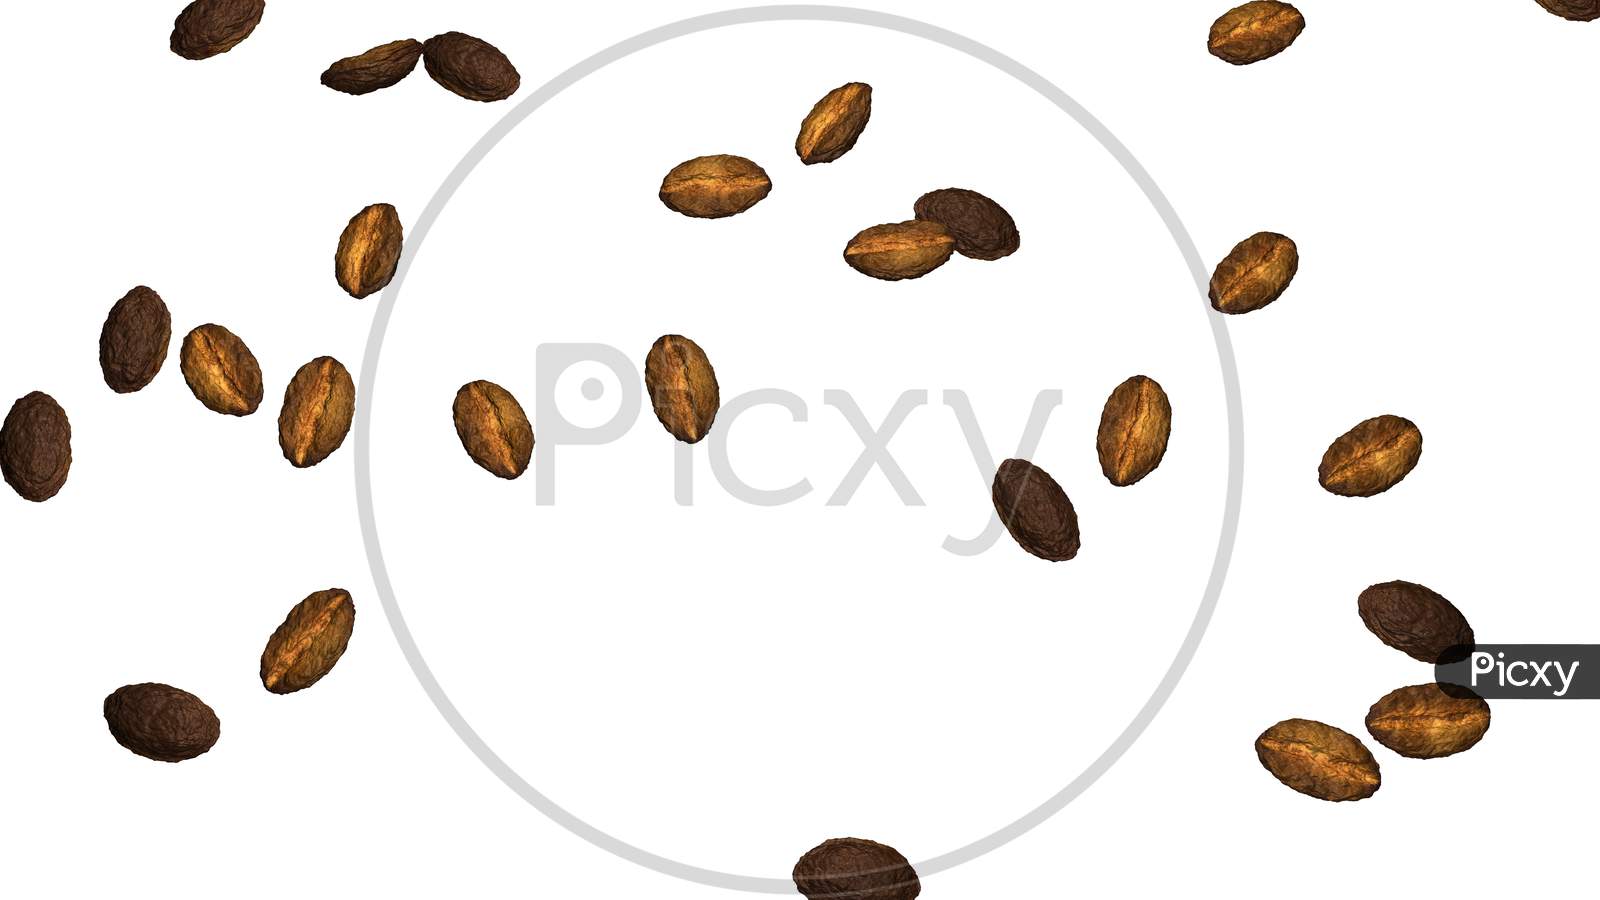 Roasted Coffee Beans Background With Copy Space For Text And Advertisements.